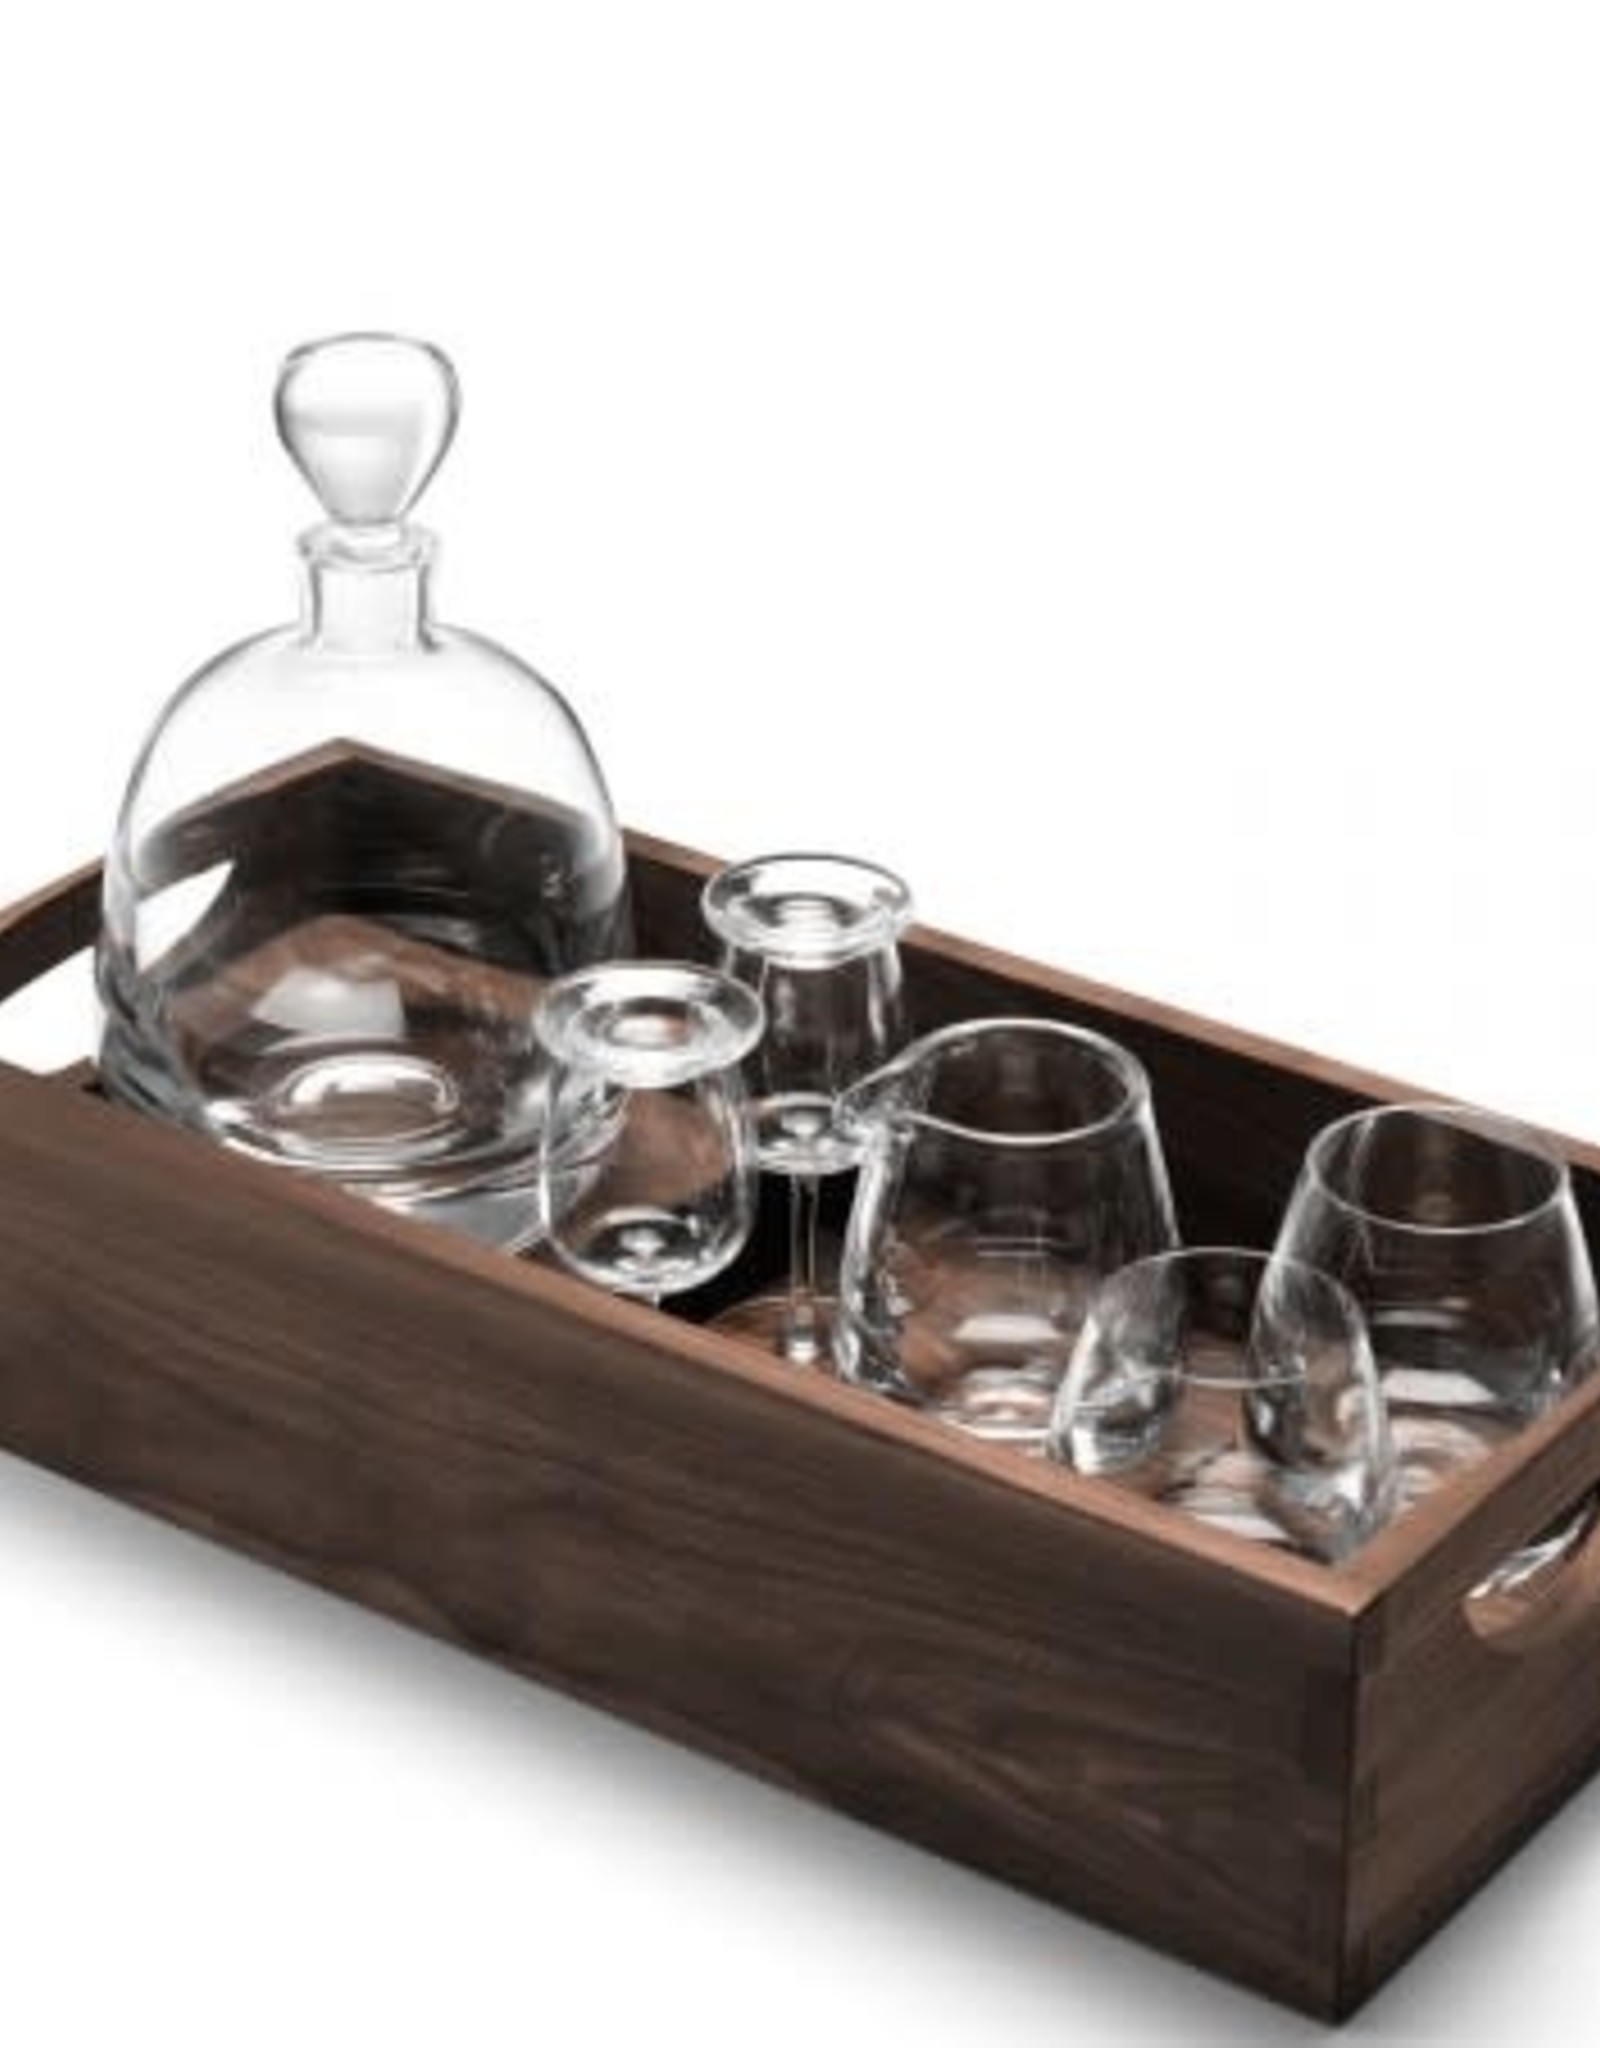 Whisky Islay Connoisseur Set & Walnut Tray L17.5in **